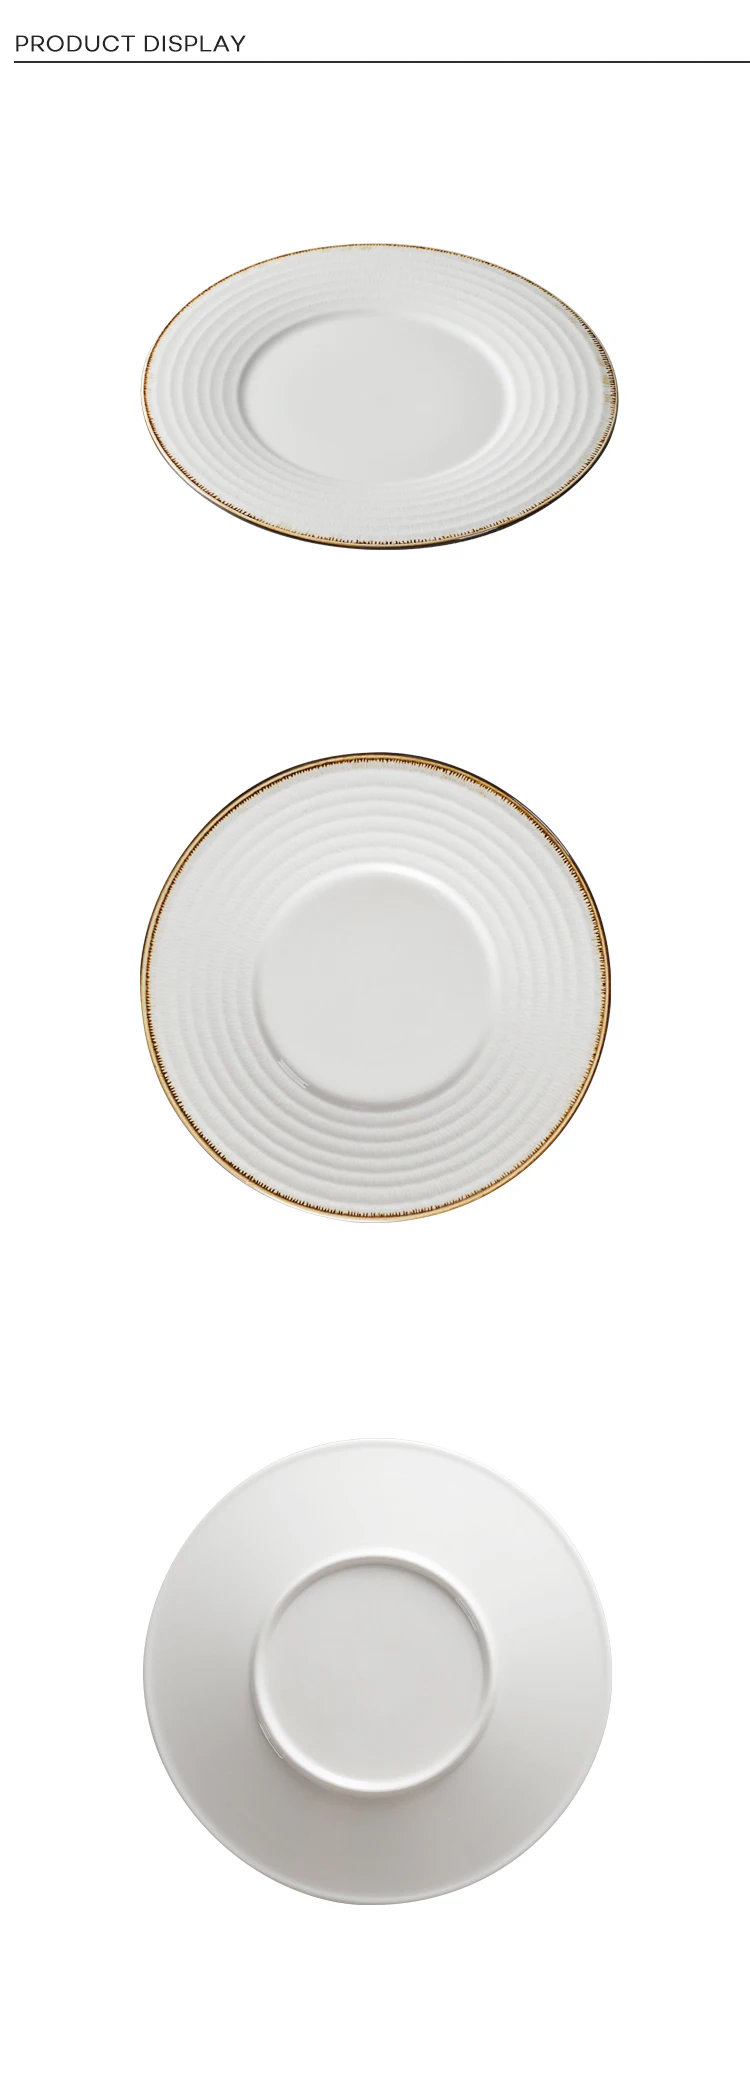 Hot Selling Simple Design Durable Dinner Plate, Trusted Supplier Top Choice  Porcelain Restaurant Plate/